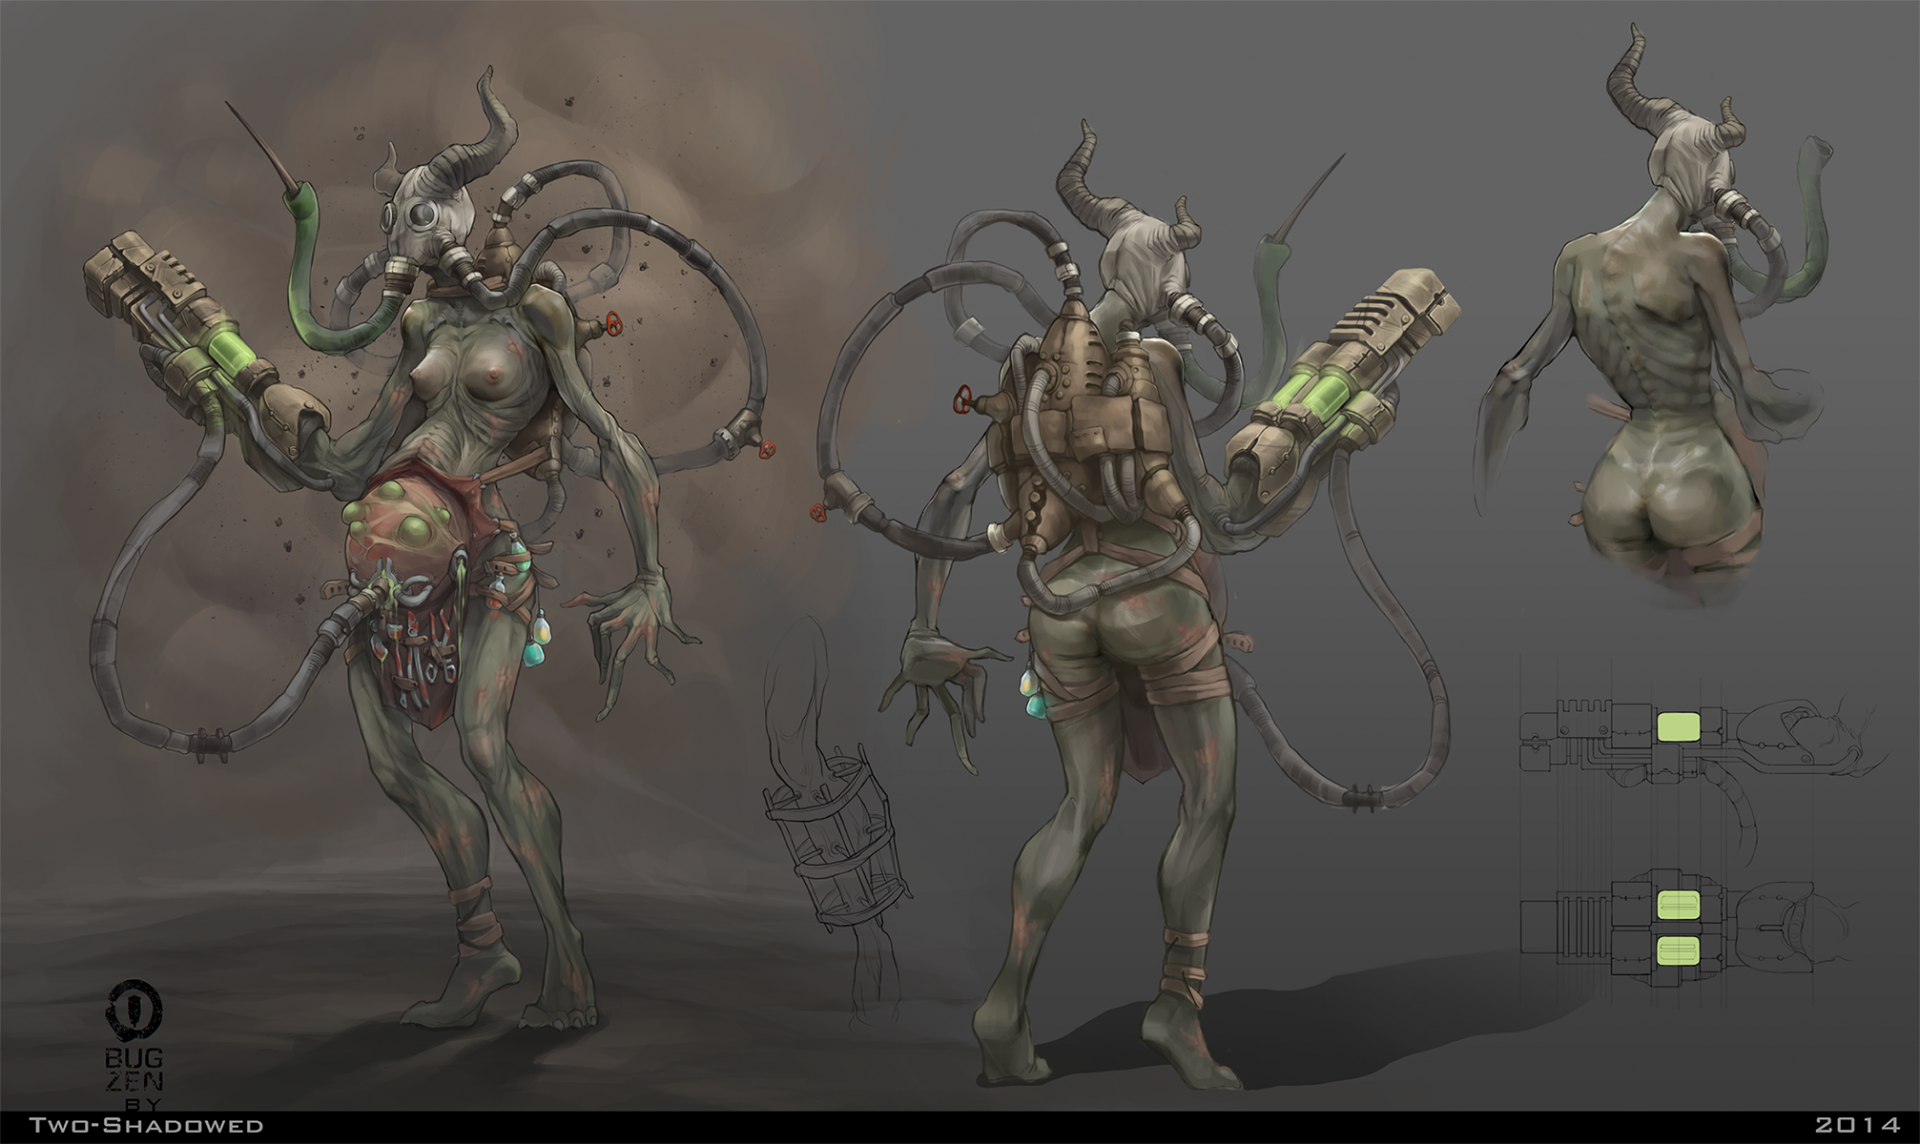 She is not common Nurgling, this is main character for the Nurgle race P&ap...